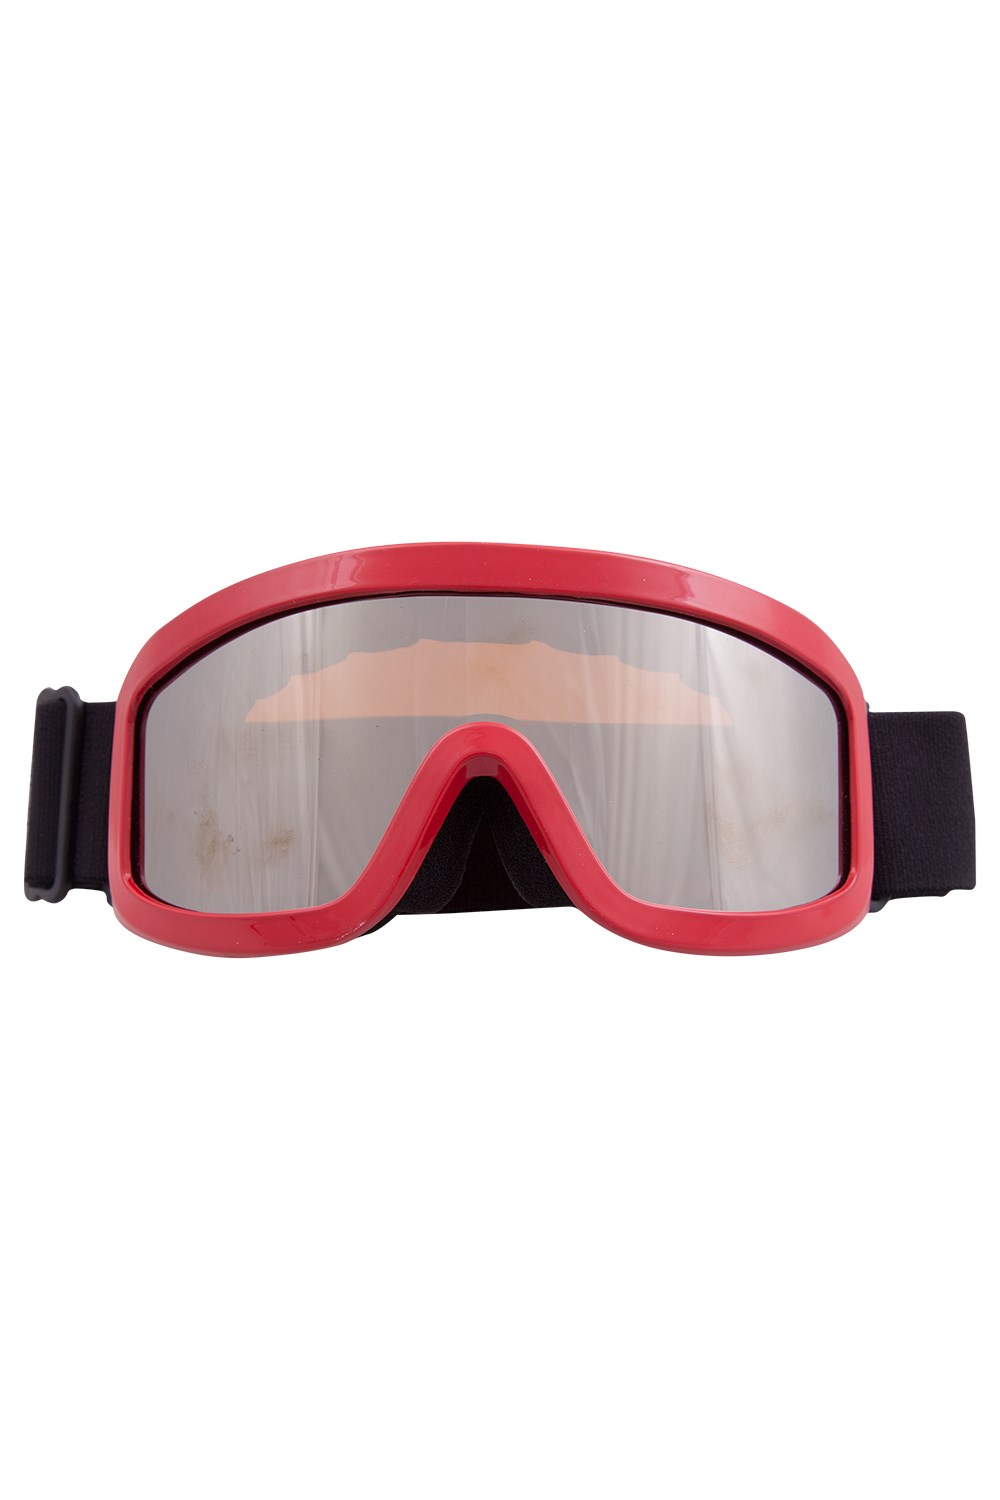 SH HORVATH Ski Snowboard Goggles Magnetic Mirrored Lens 120s Anti-Fog for Adult 